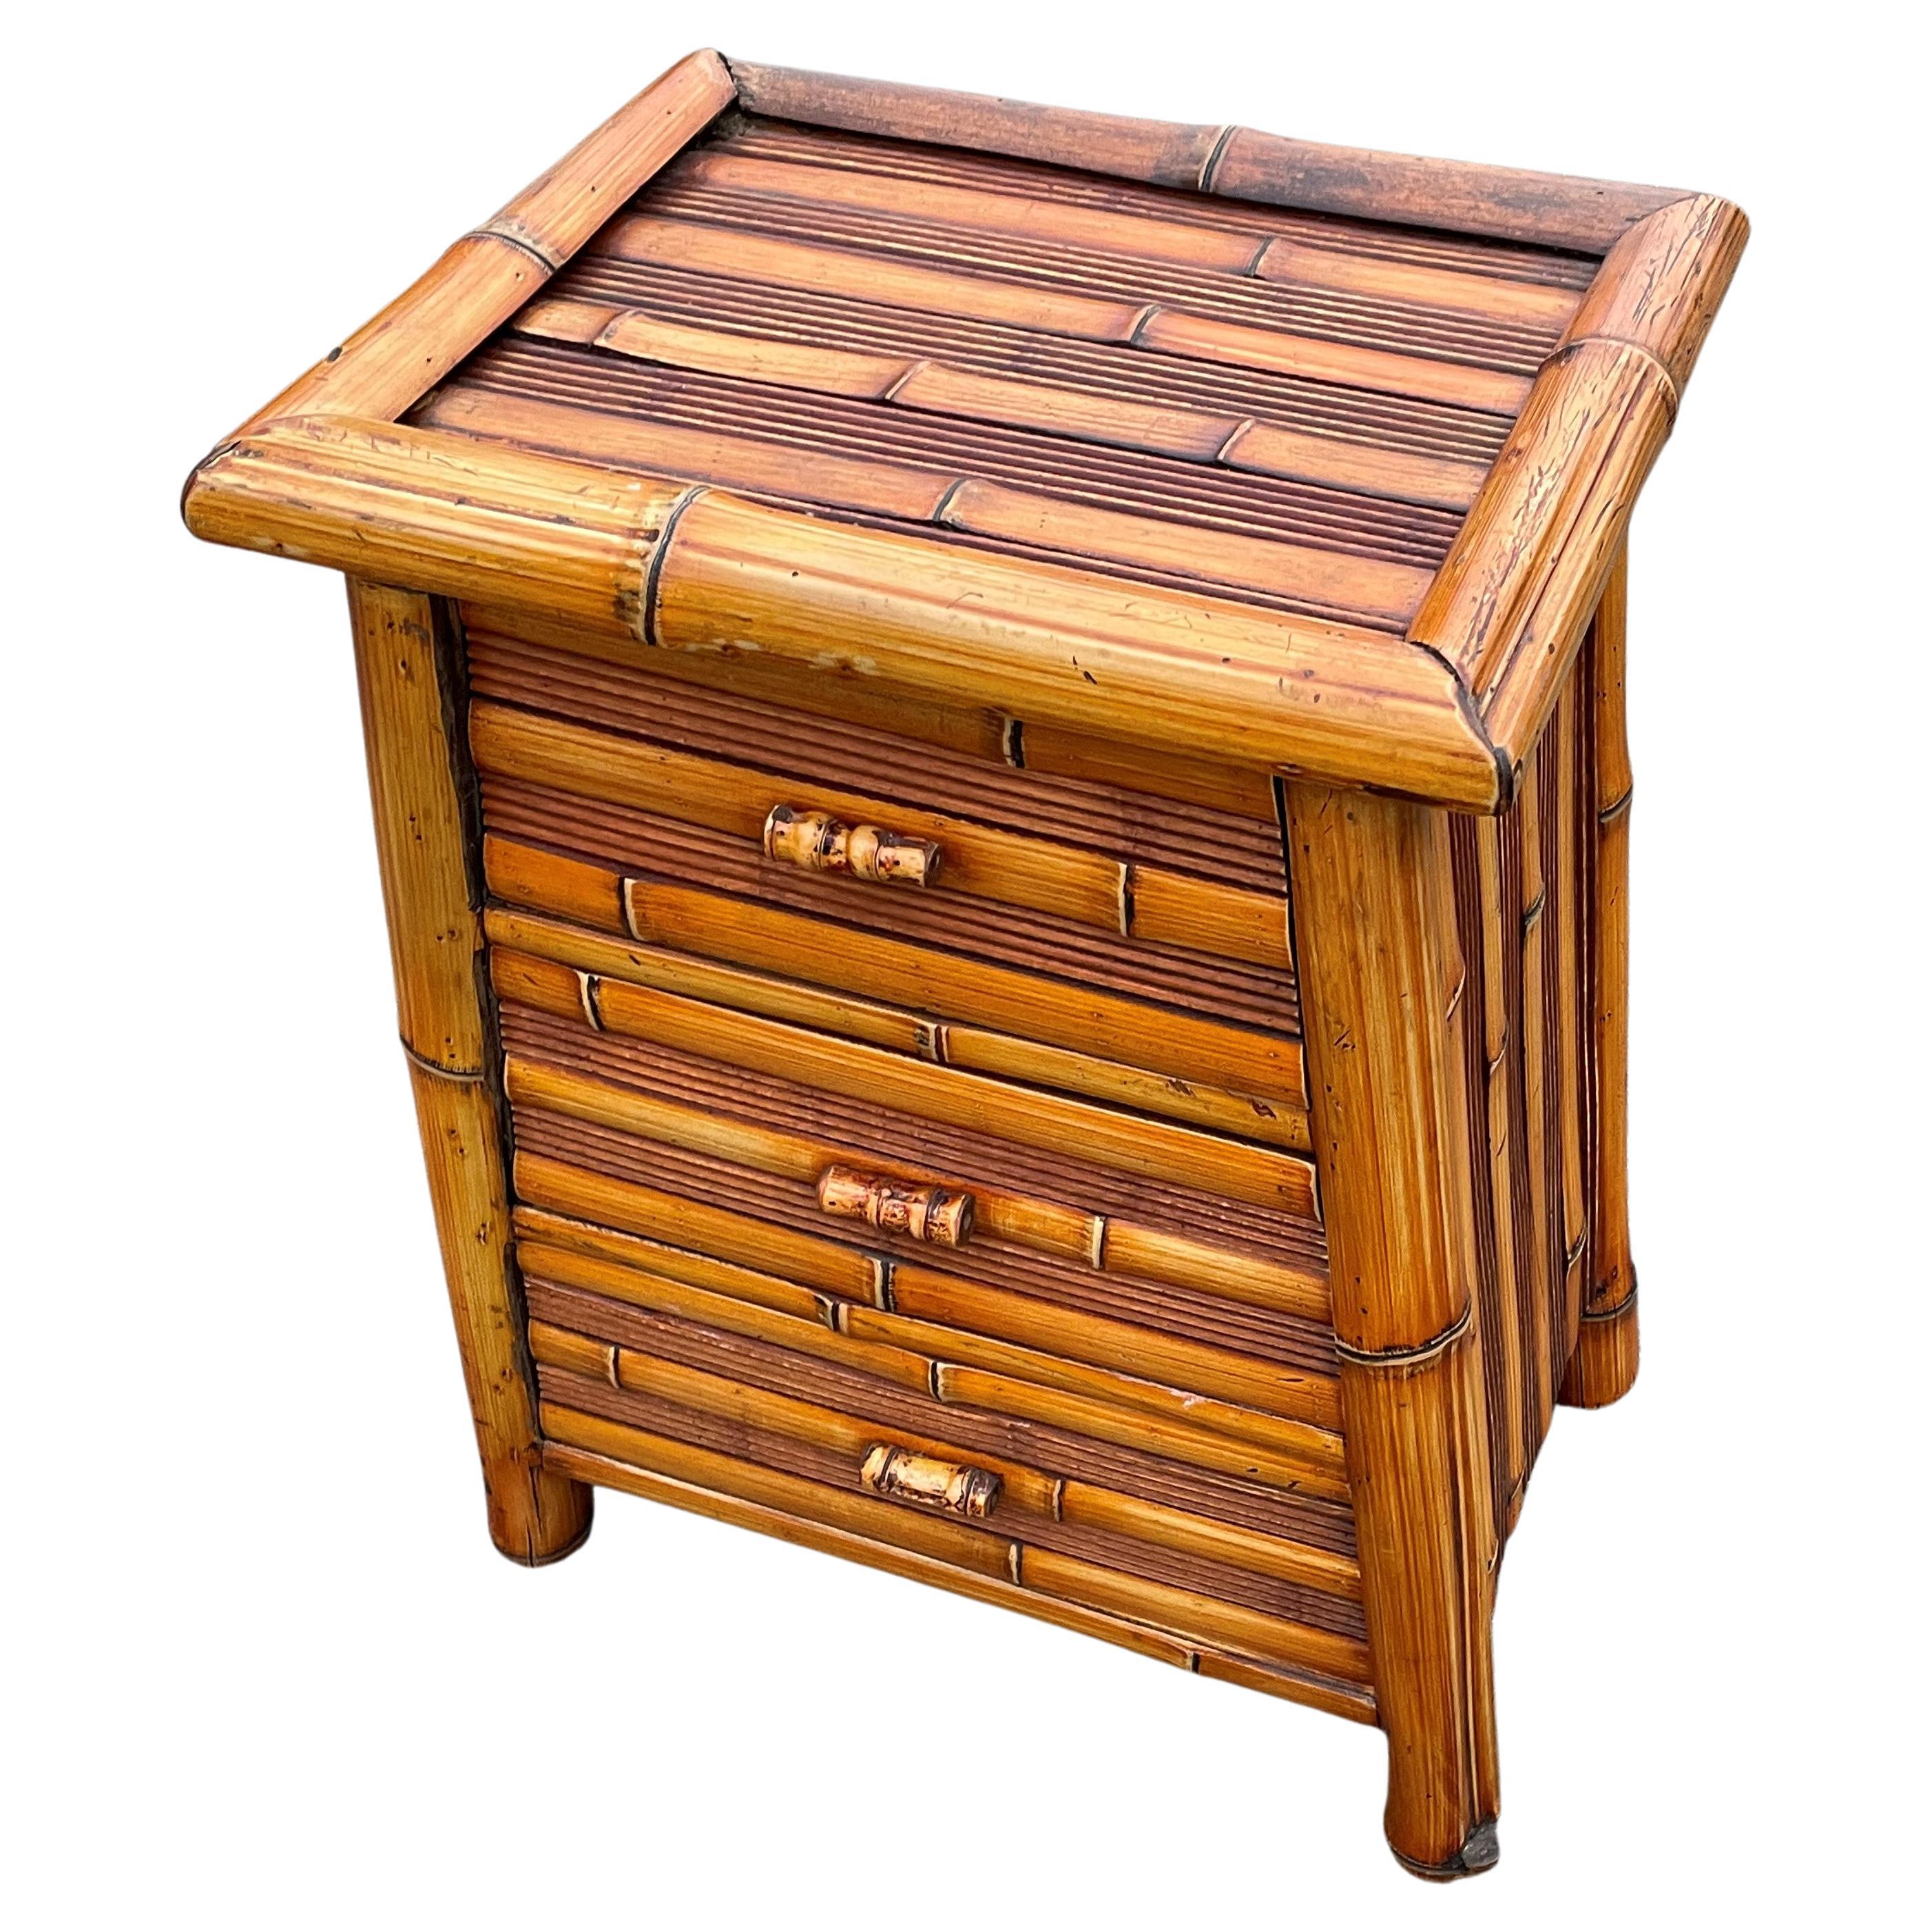 20th Century Very Cool & Practical Midcentury Modern Bamboo Chest of Drawers / Small Cabinet